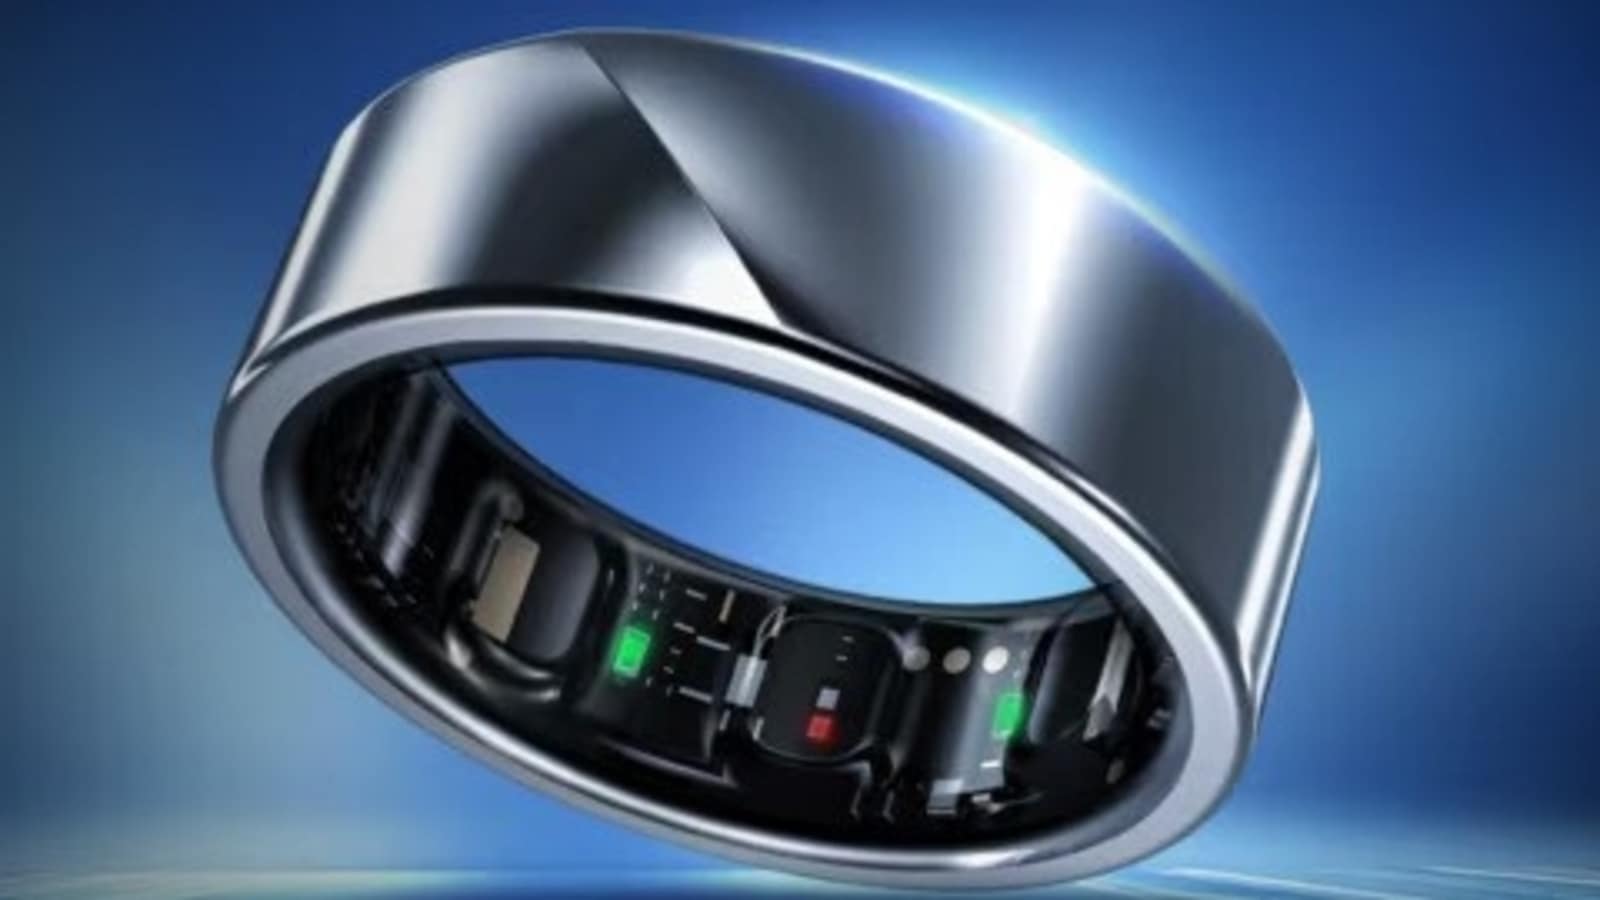 Samsung Galaxy Ring - Surprising Features - YouTube